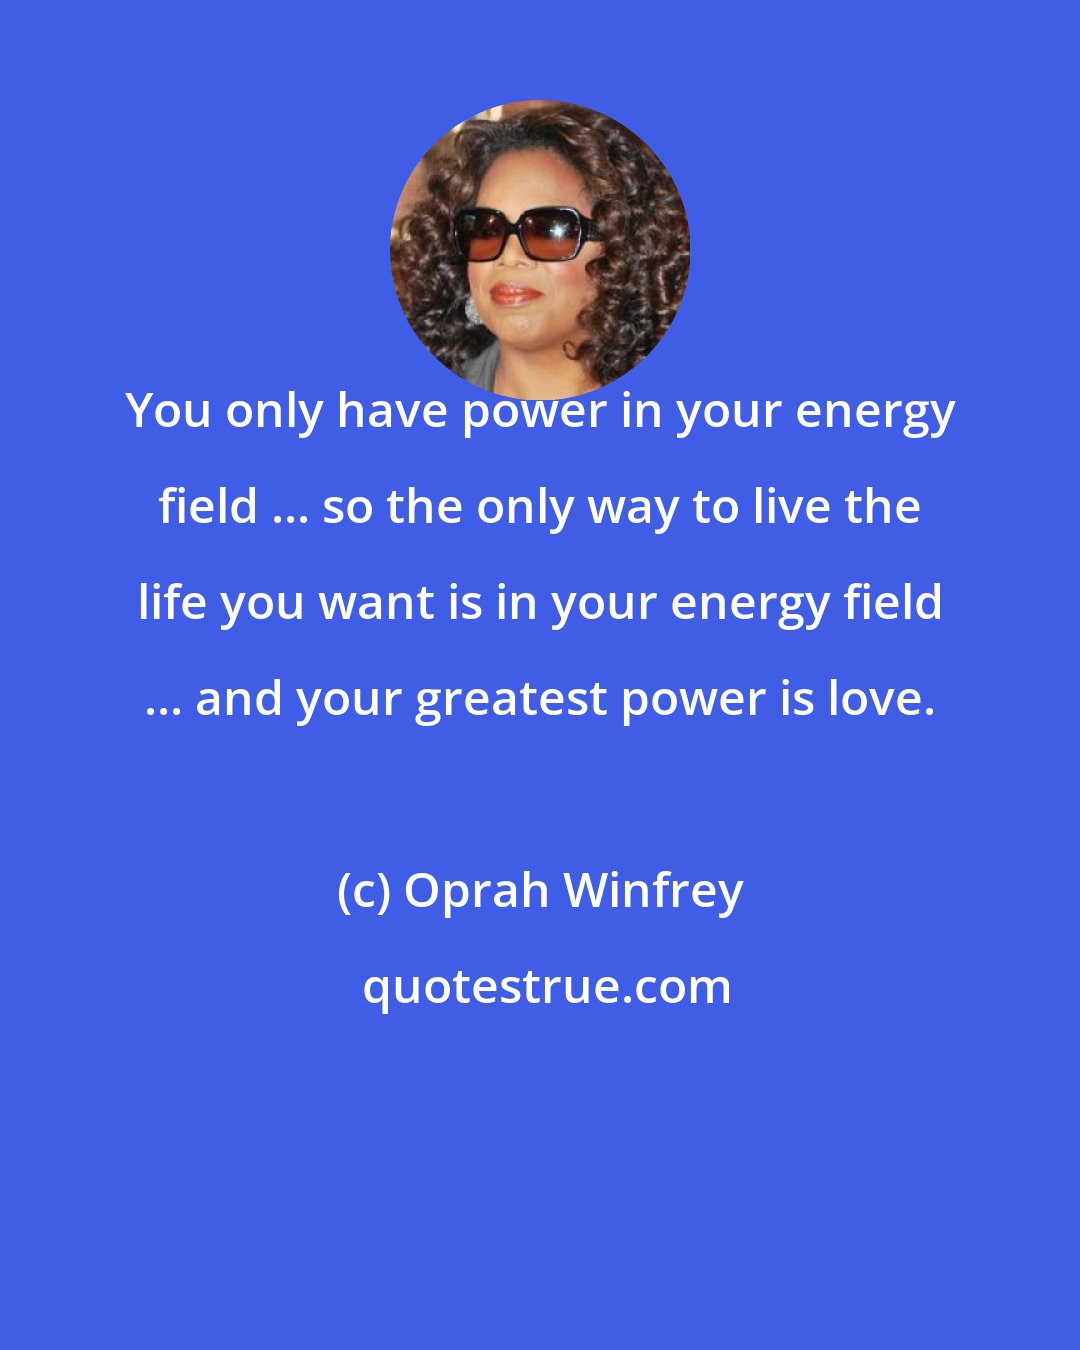 Oprah Winfrey: You only have power in your energy field ... so the only way to live the life you want is in your energy field ... and your greatest power is love.